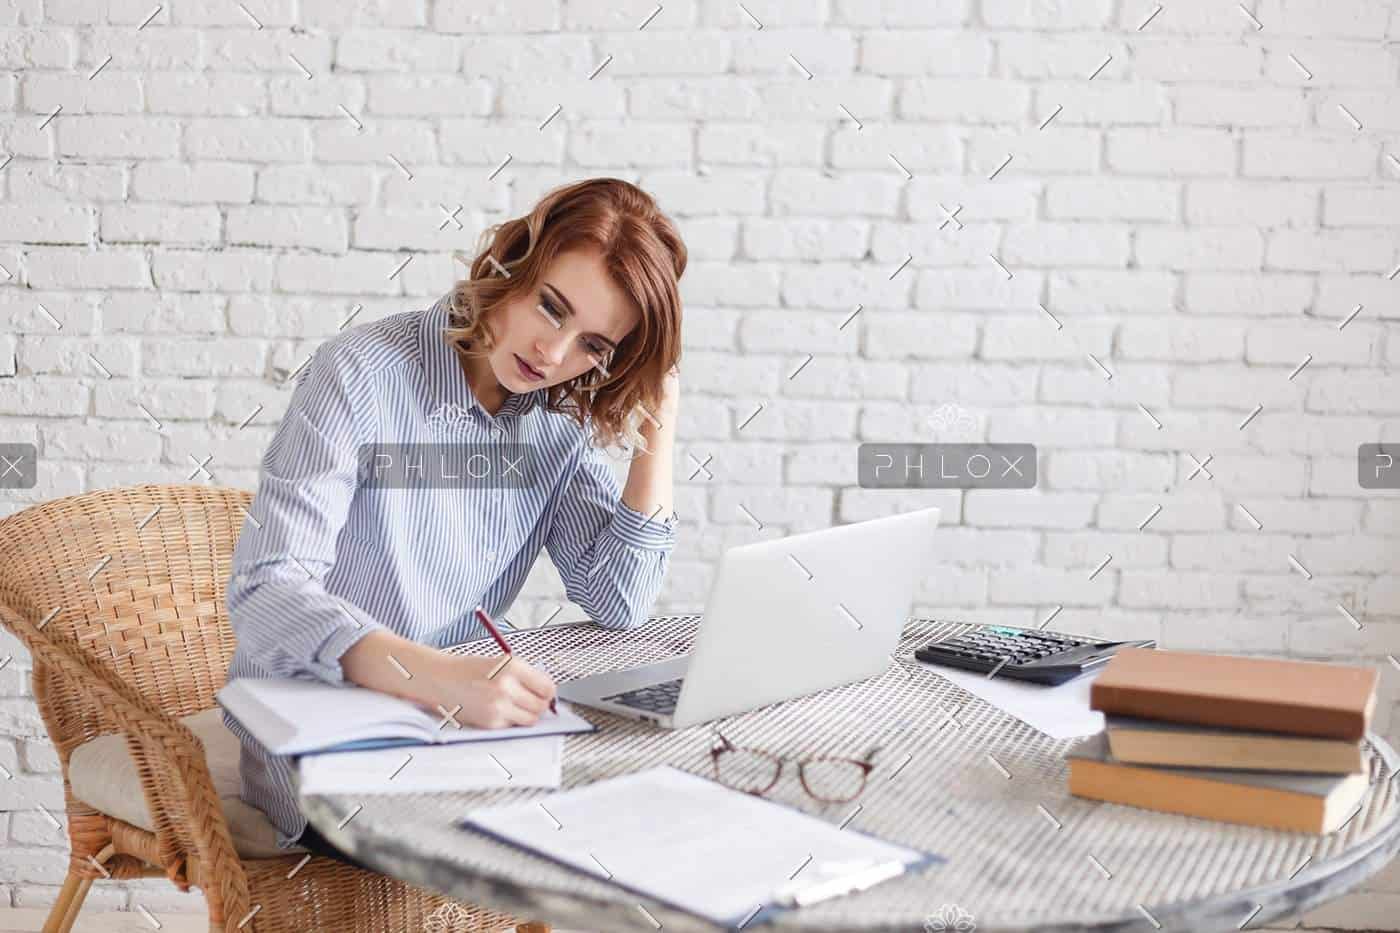 Woman freelancer writing with pen